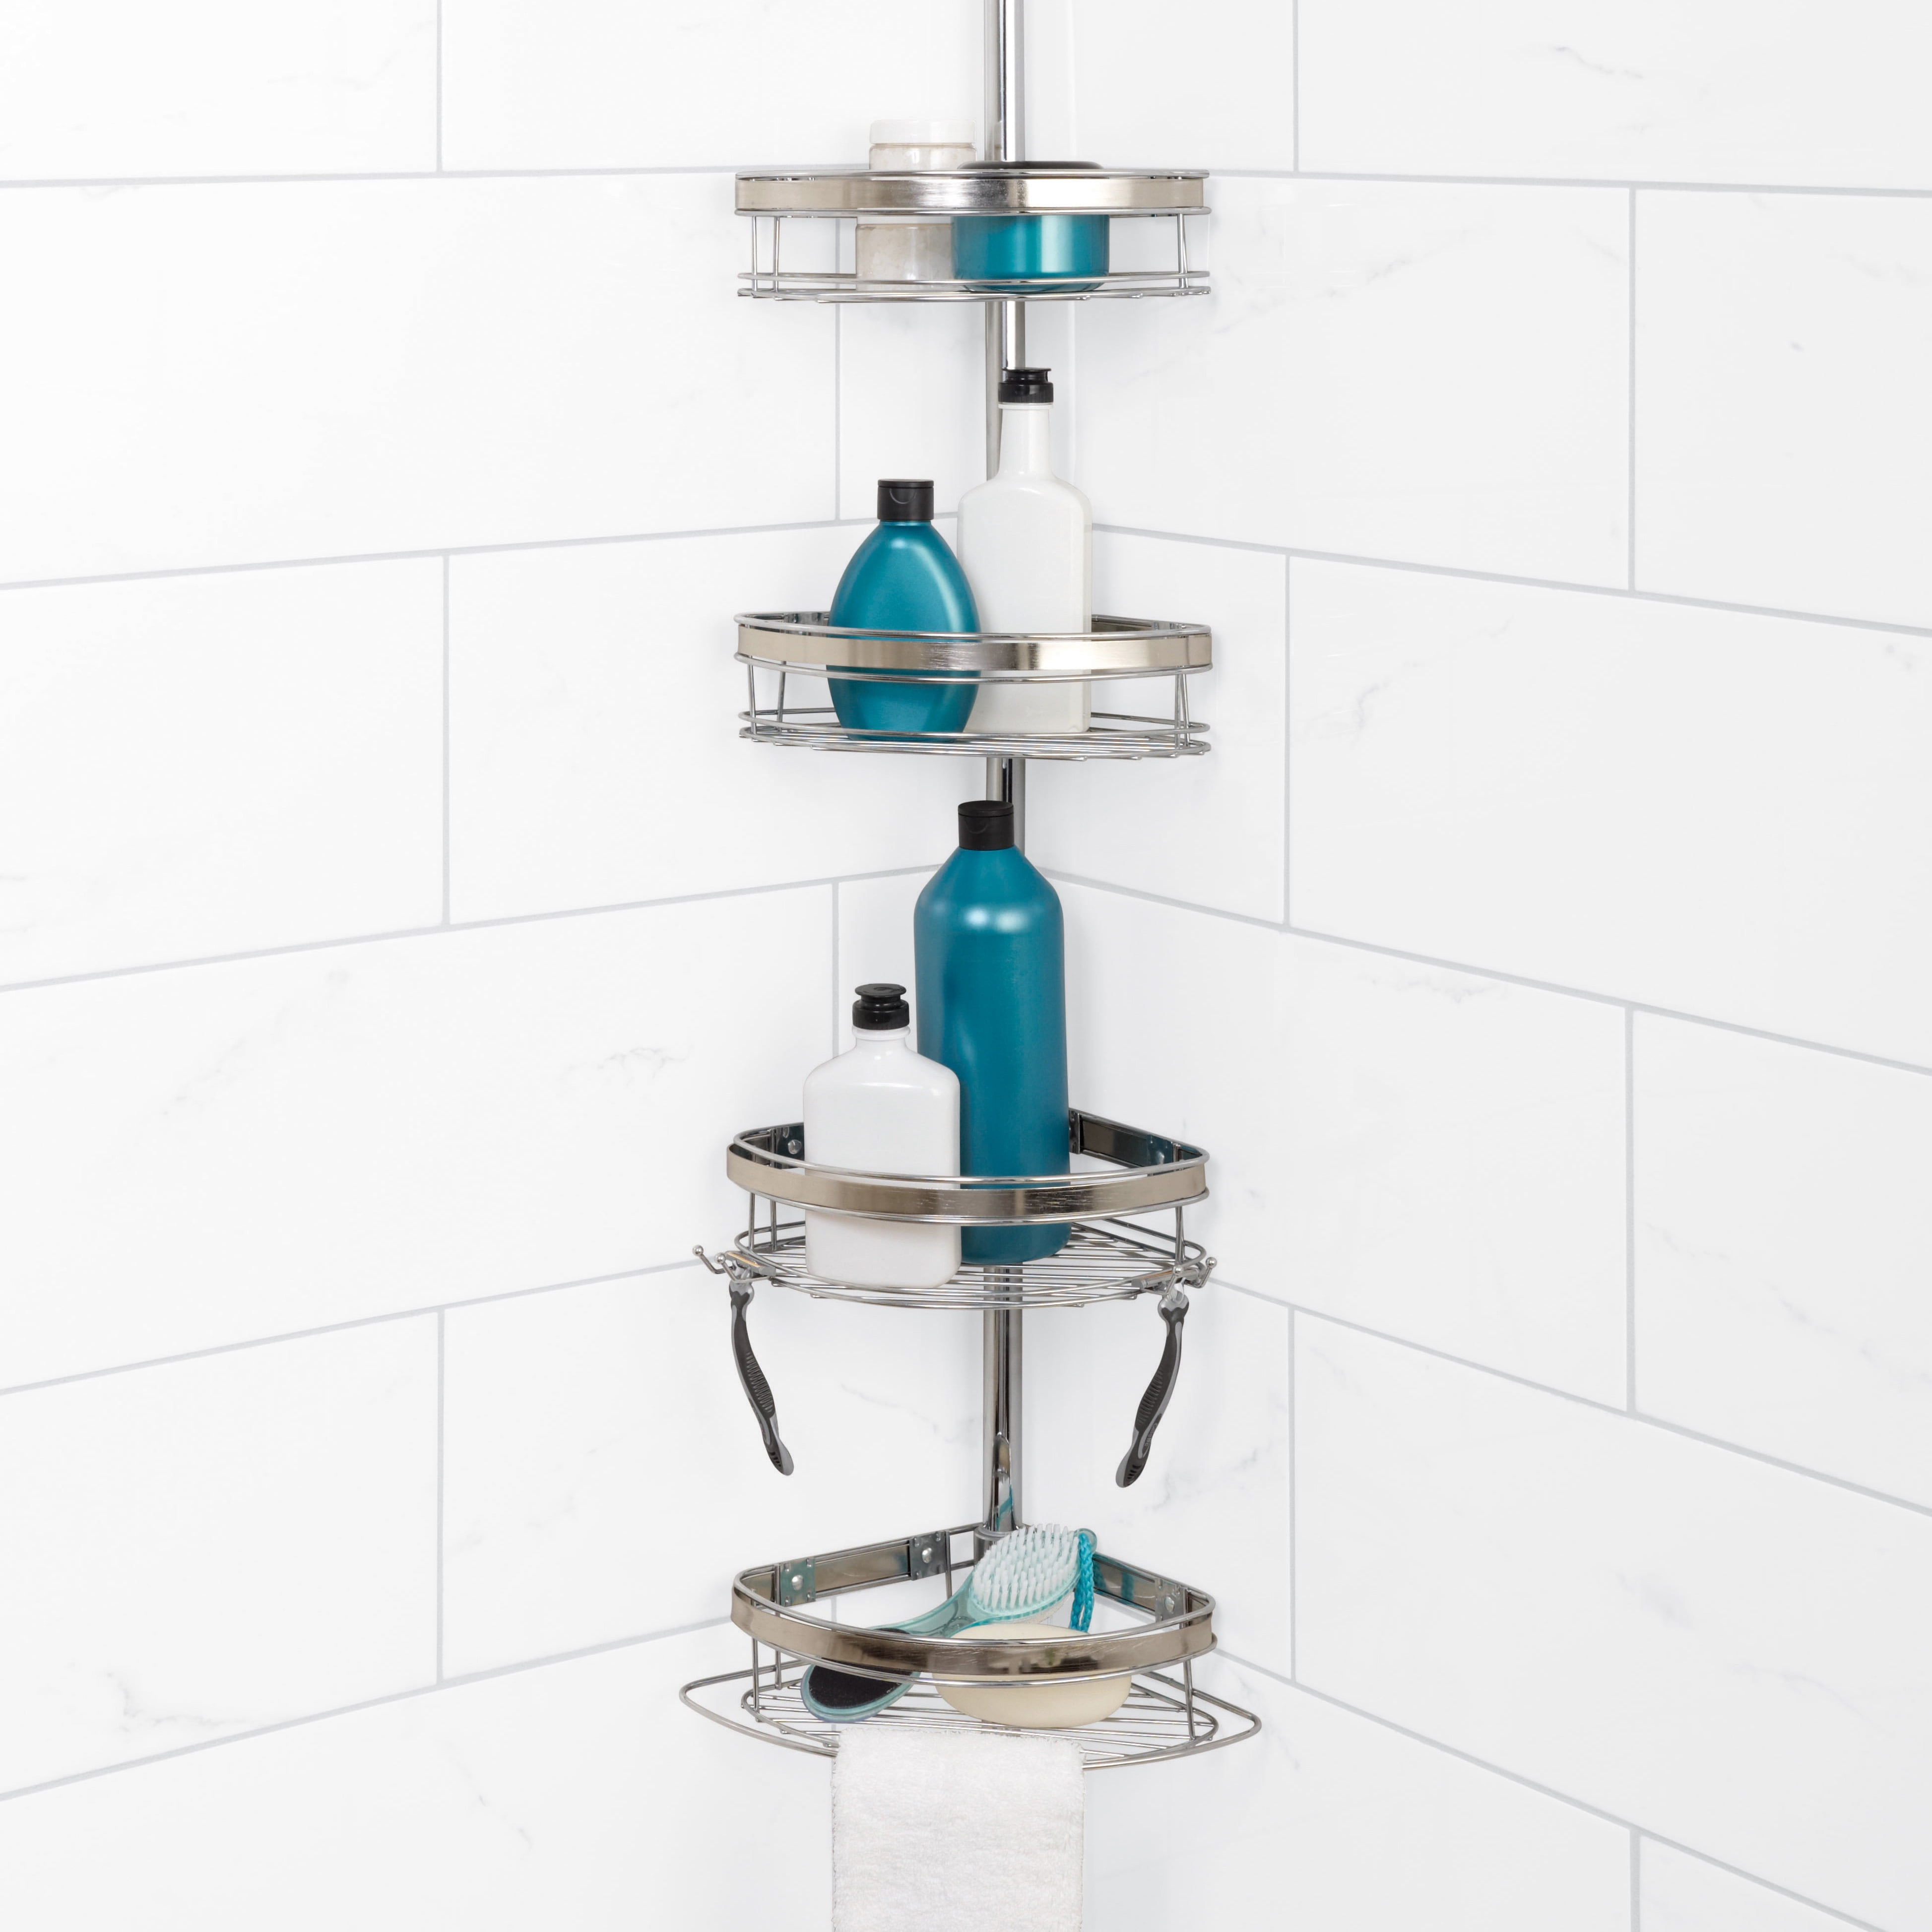 Chrome Shower Caddy with 4 Shelves, Zenna Home Tension Pole with